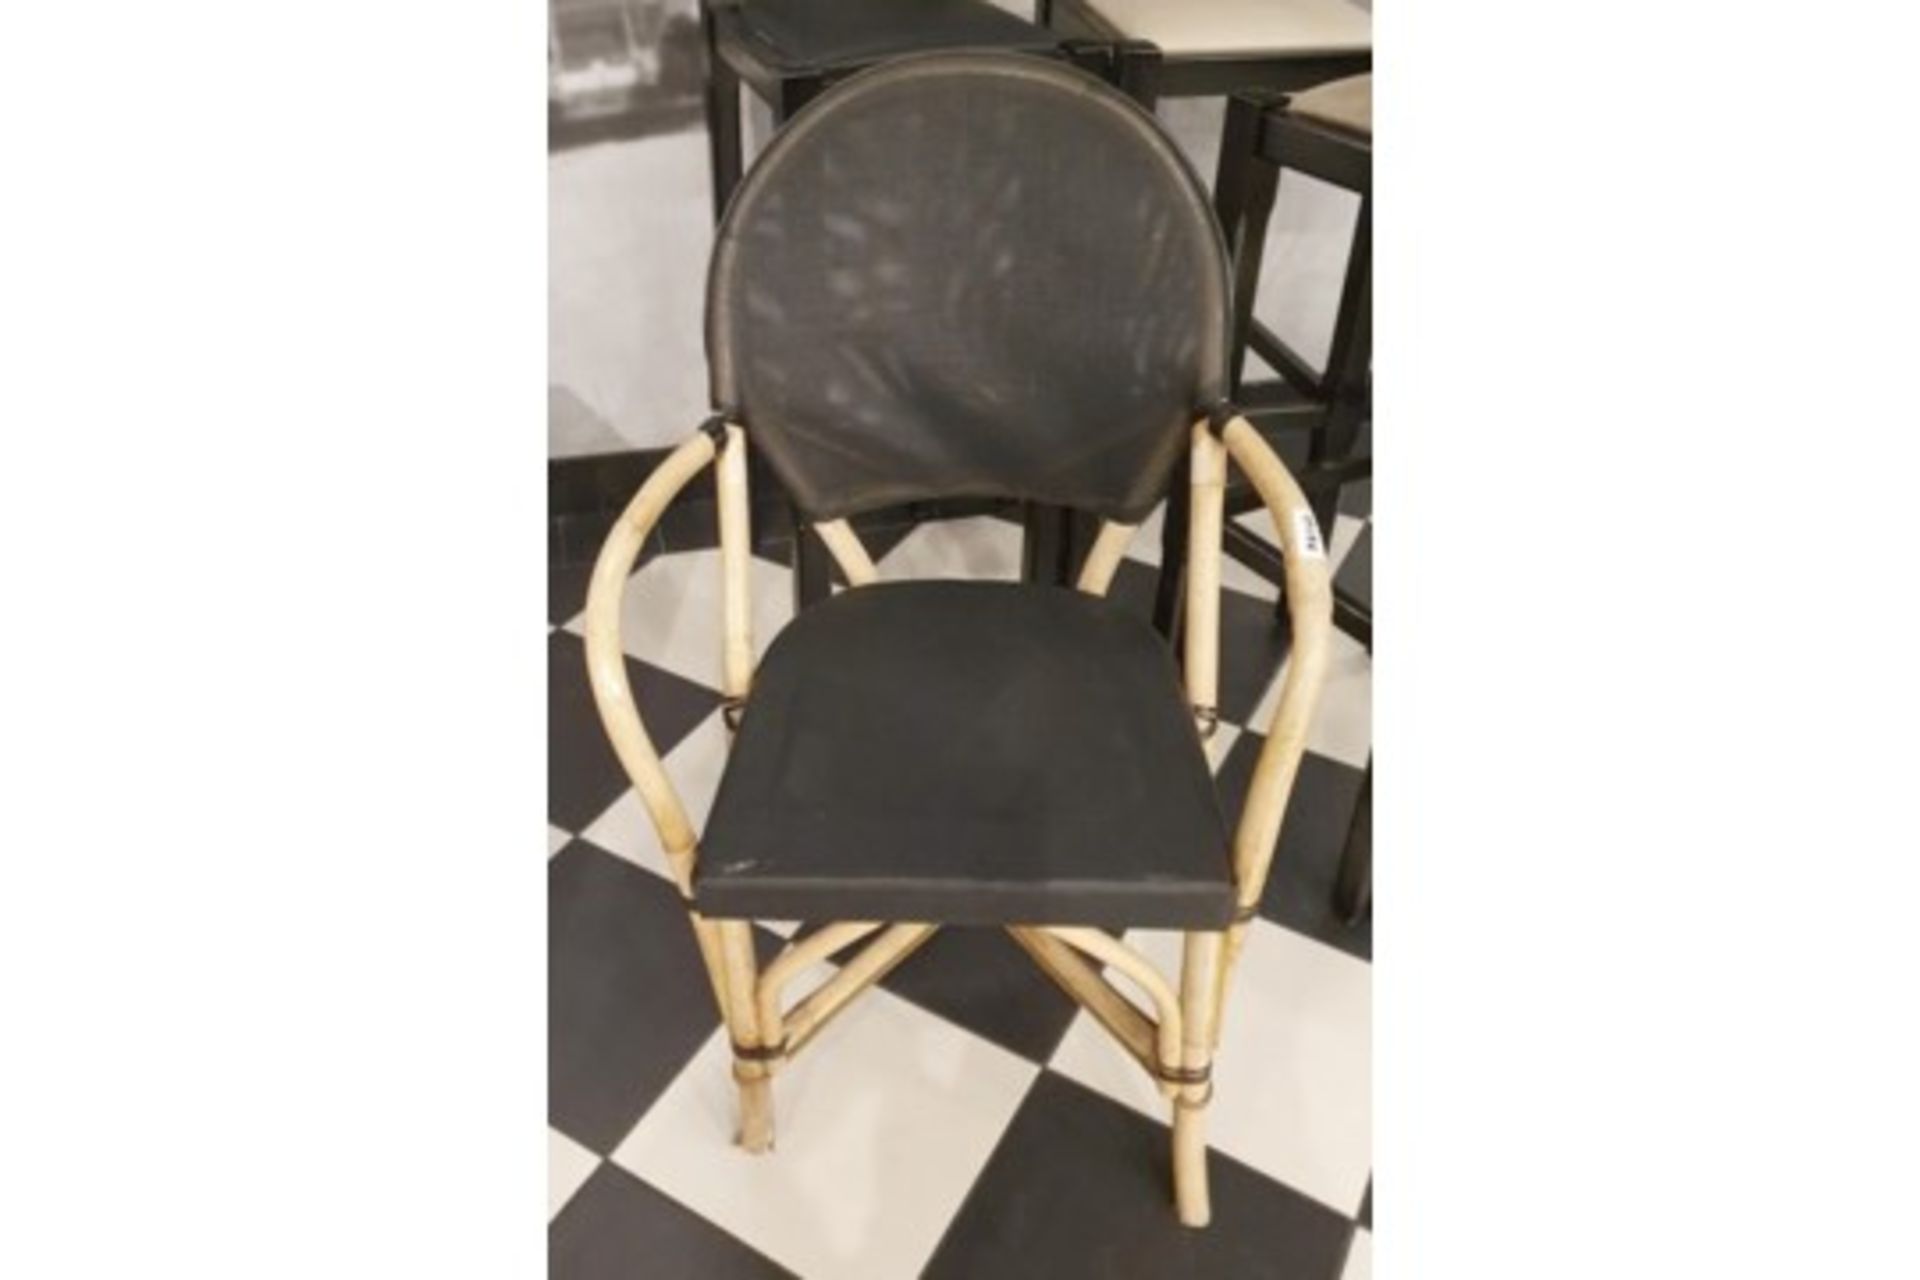 5 x Bamboo Studio Chairs With Black Seat and Back Rest - Dimensions: H44/88 x W54 x D39 cms - Image 3 of 5